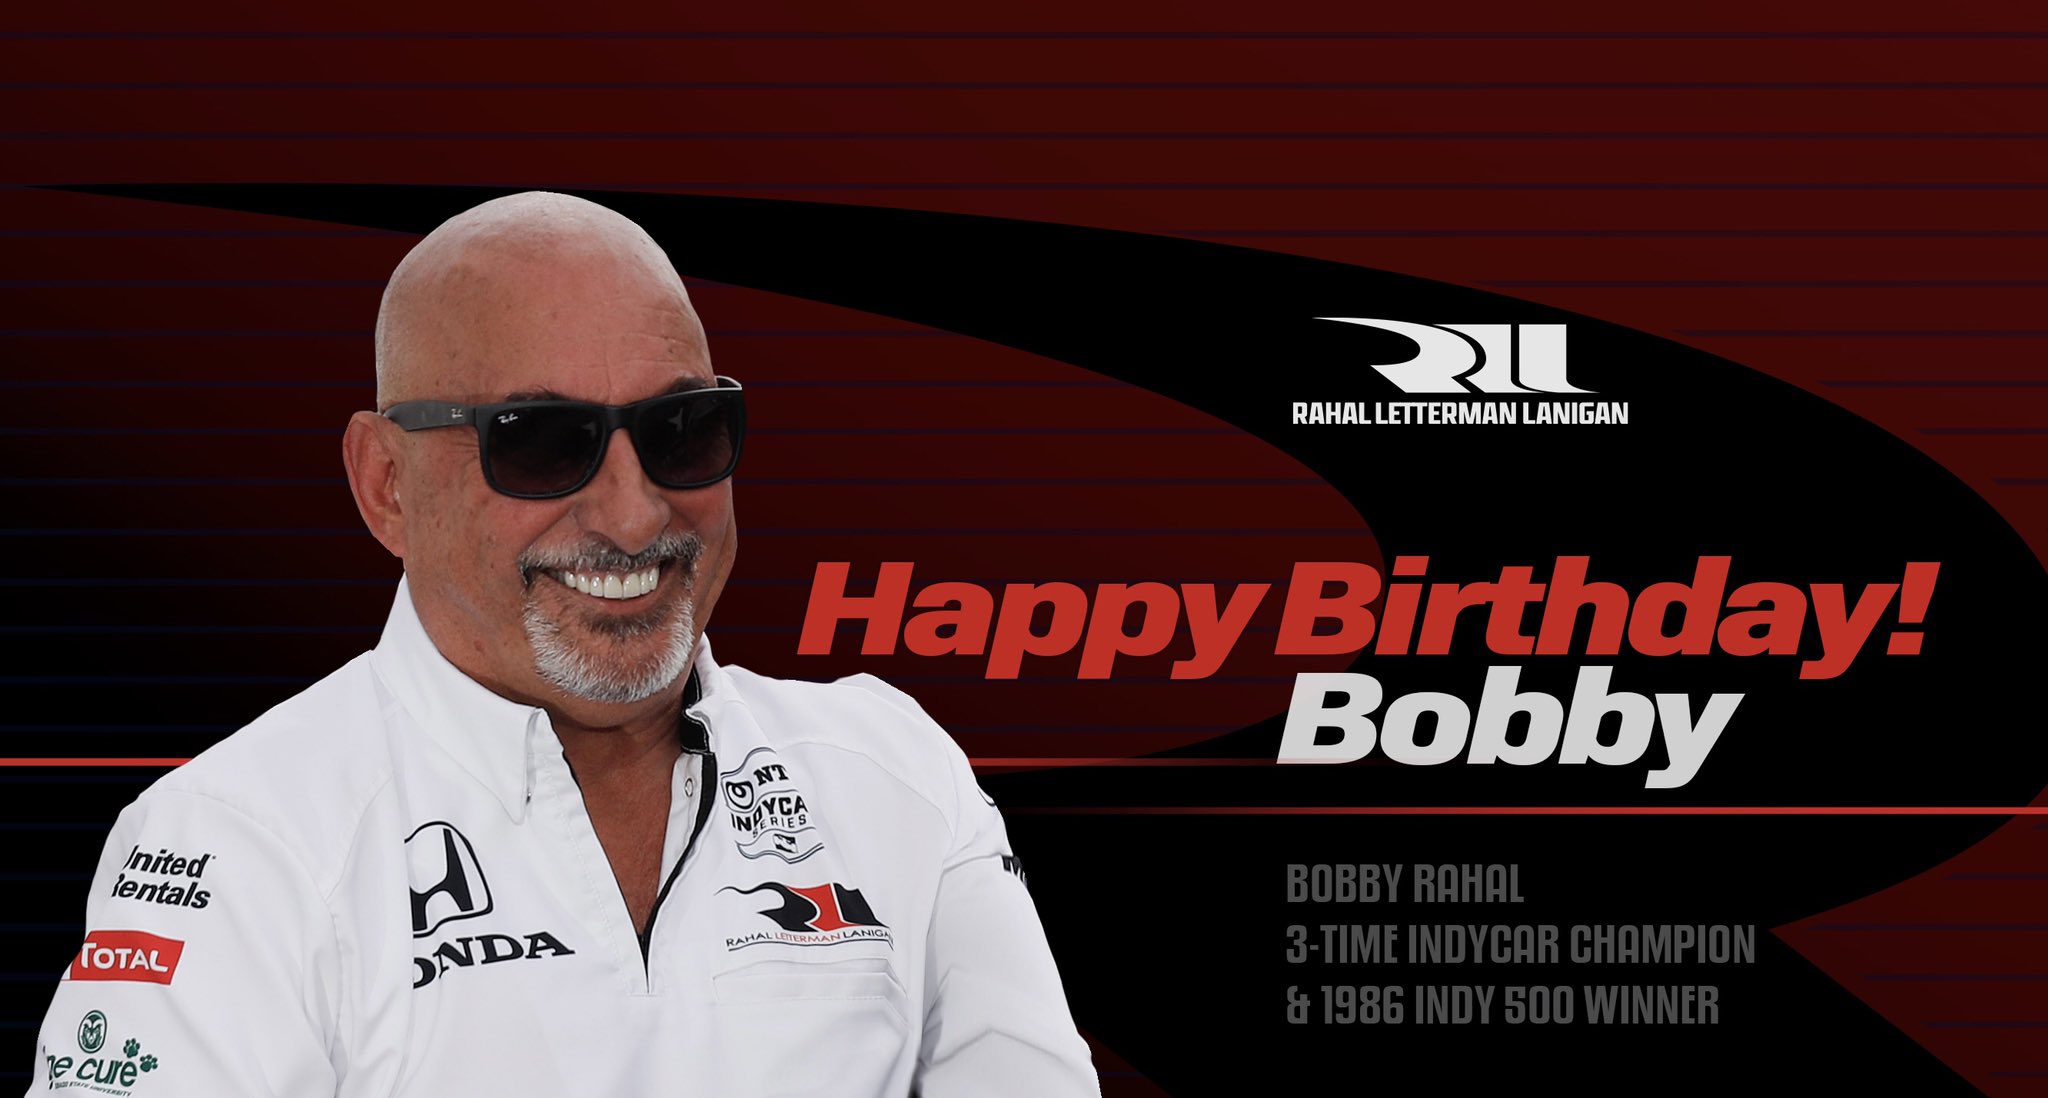 It s Bobby Rahal s birthday today!

Join us in wishing him a very Happy Birthday and a great year ahead.     